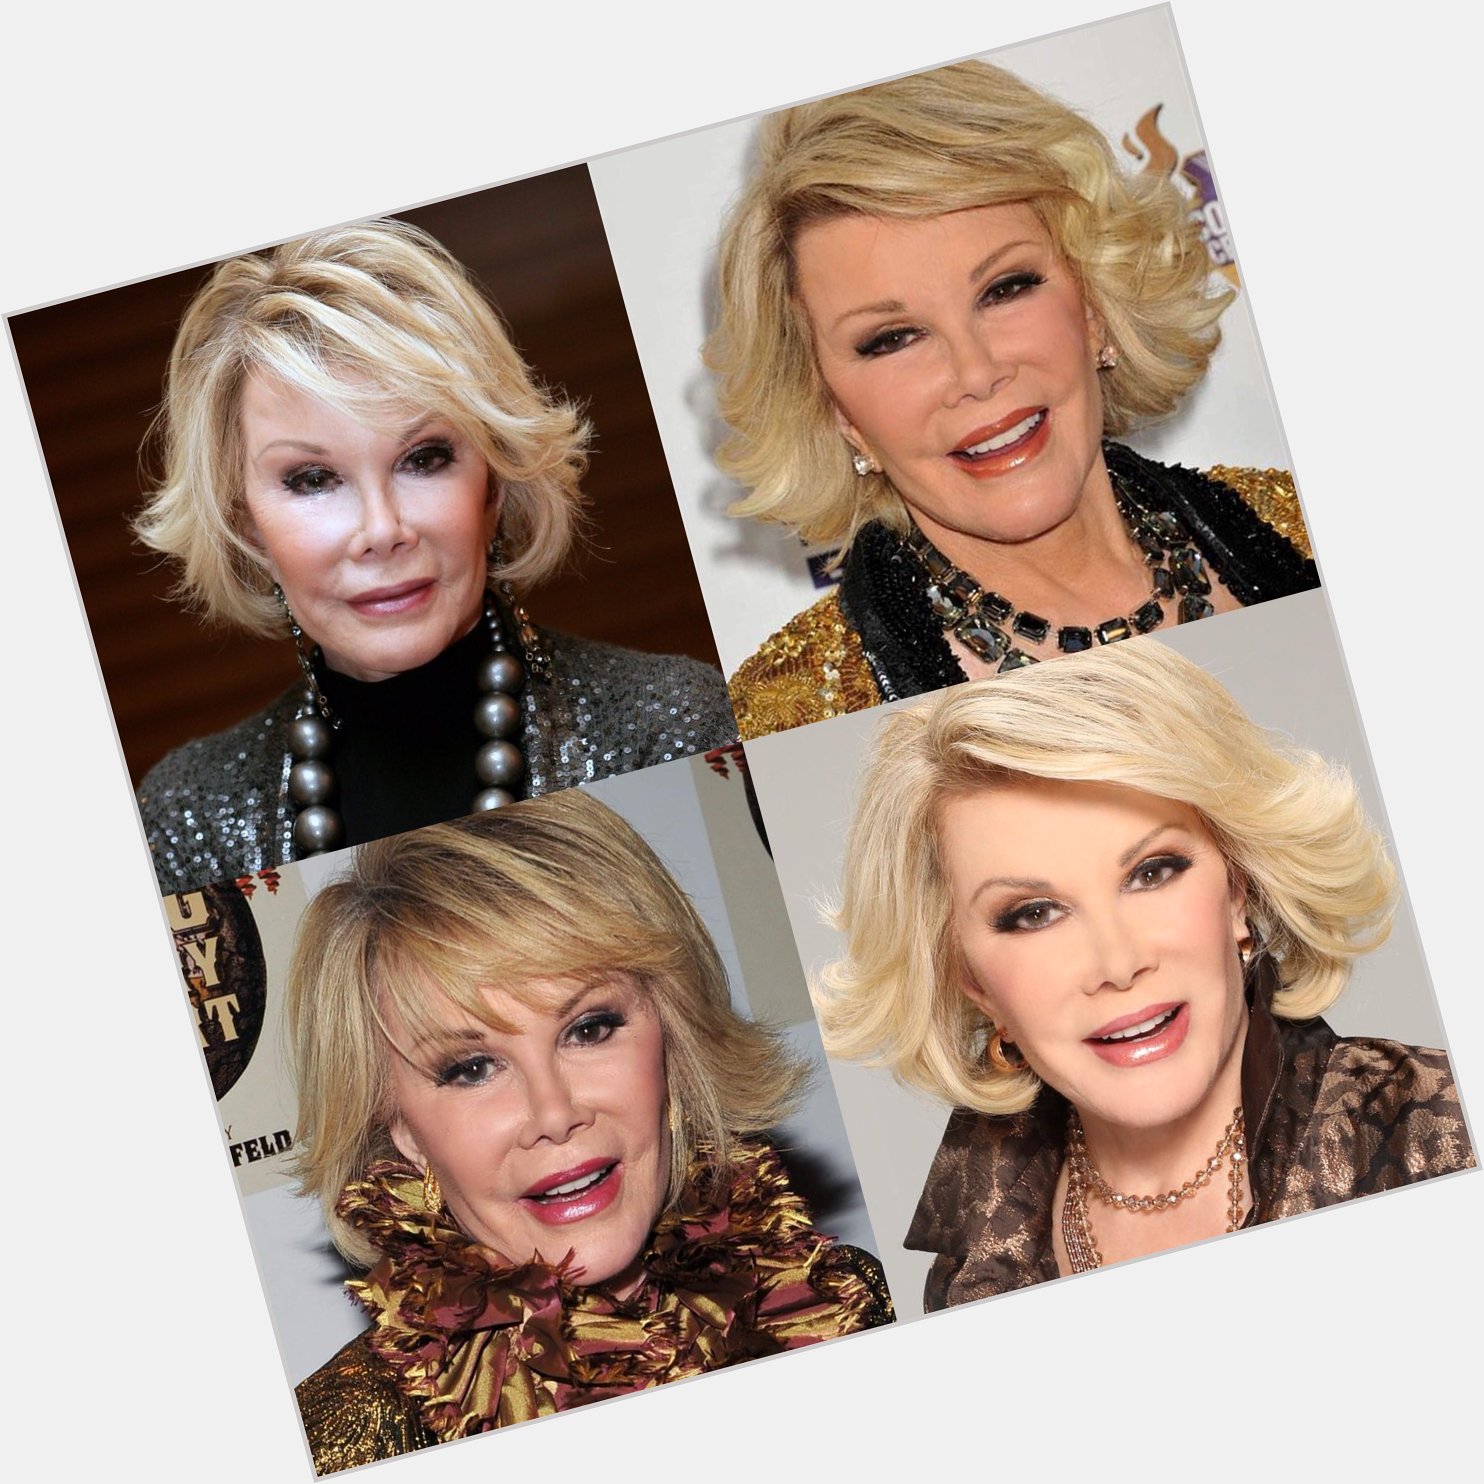 Happy 87 birthday to Joan Rivers up in heaven. May she Rest In Peace.  